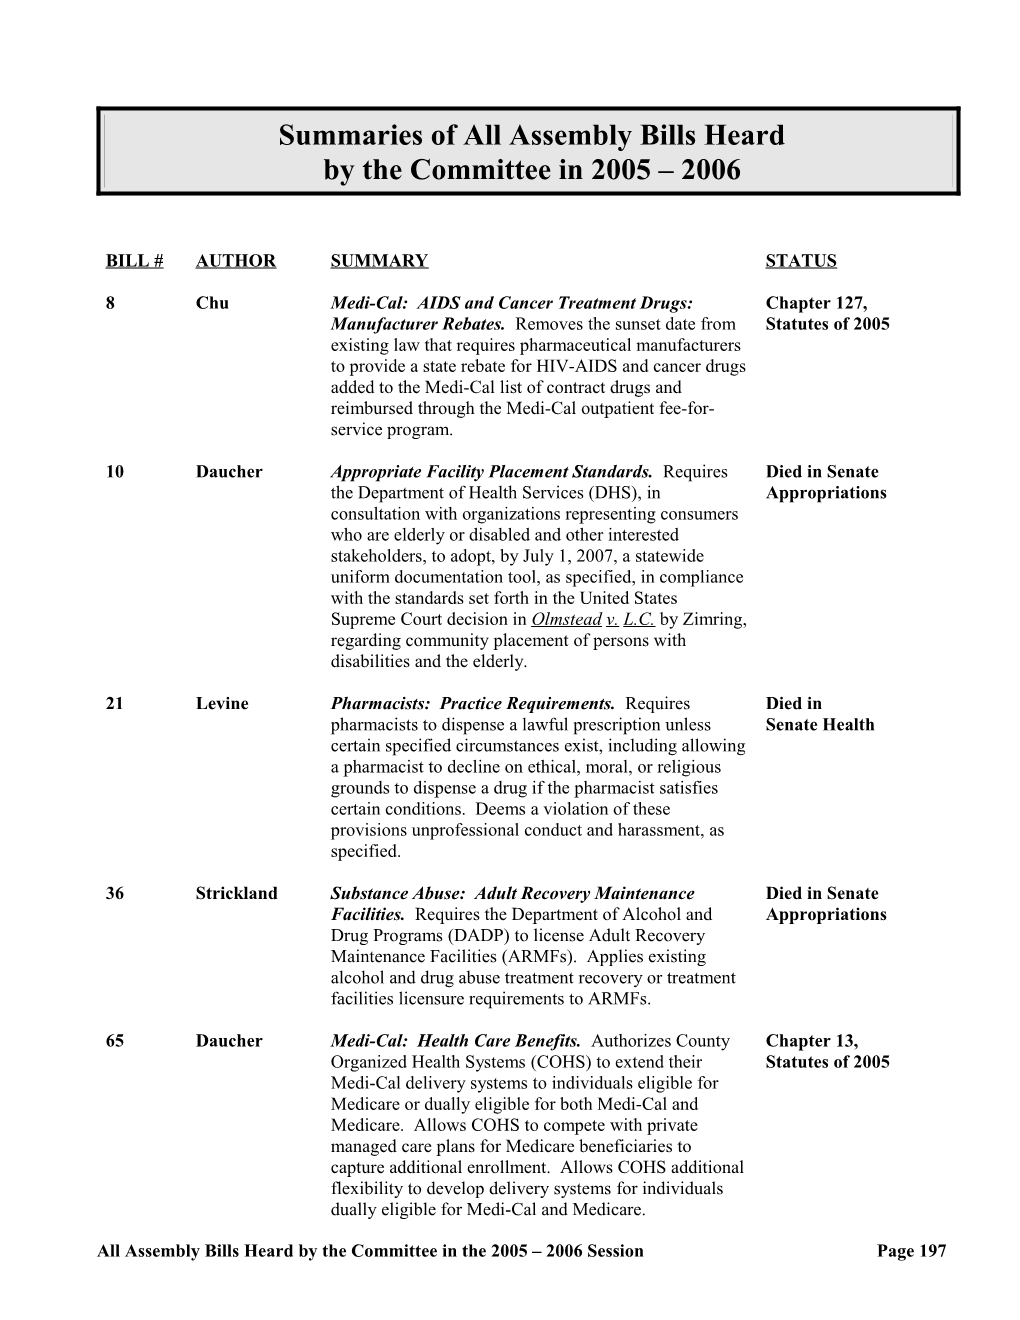 Committee Record of Assembly Bills